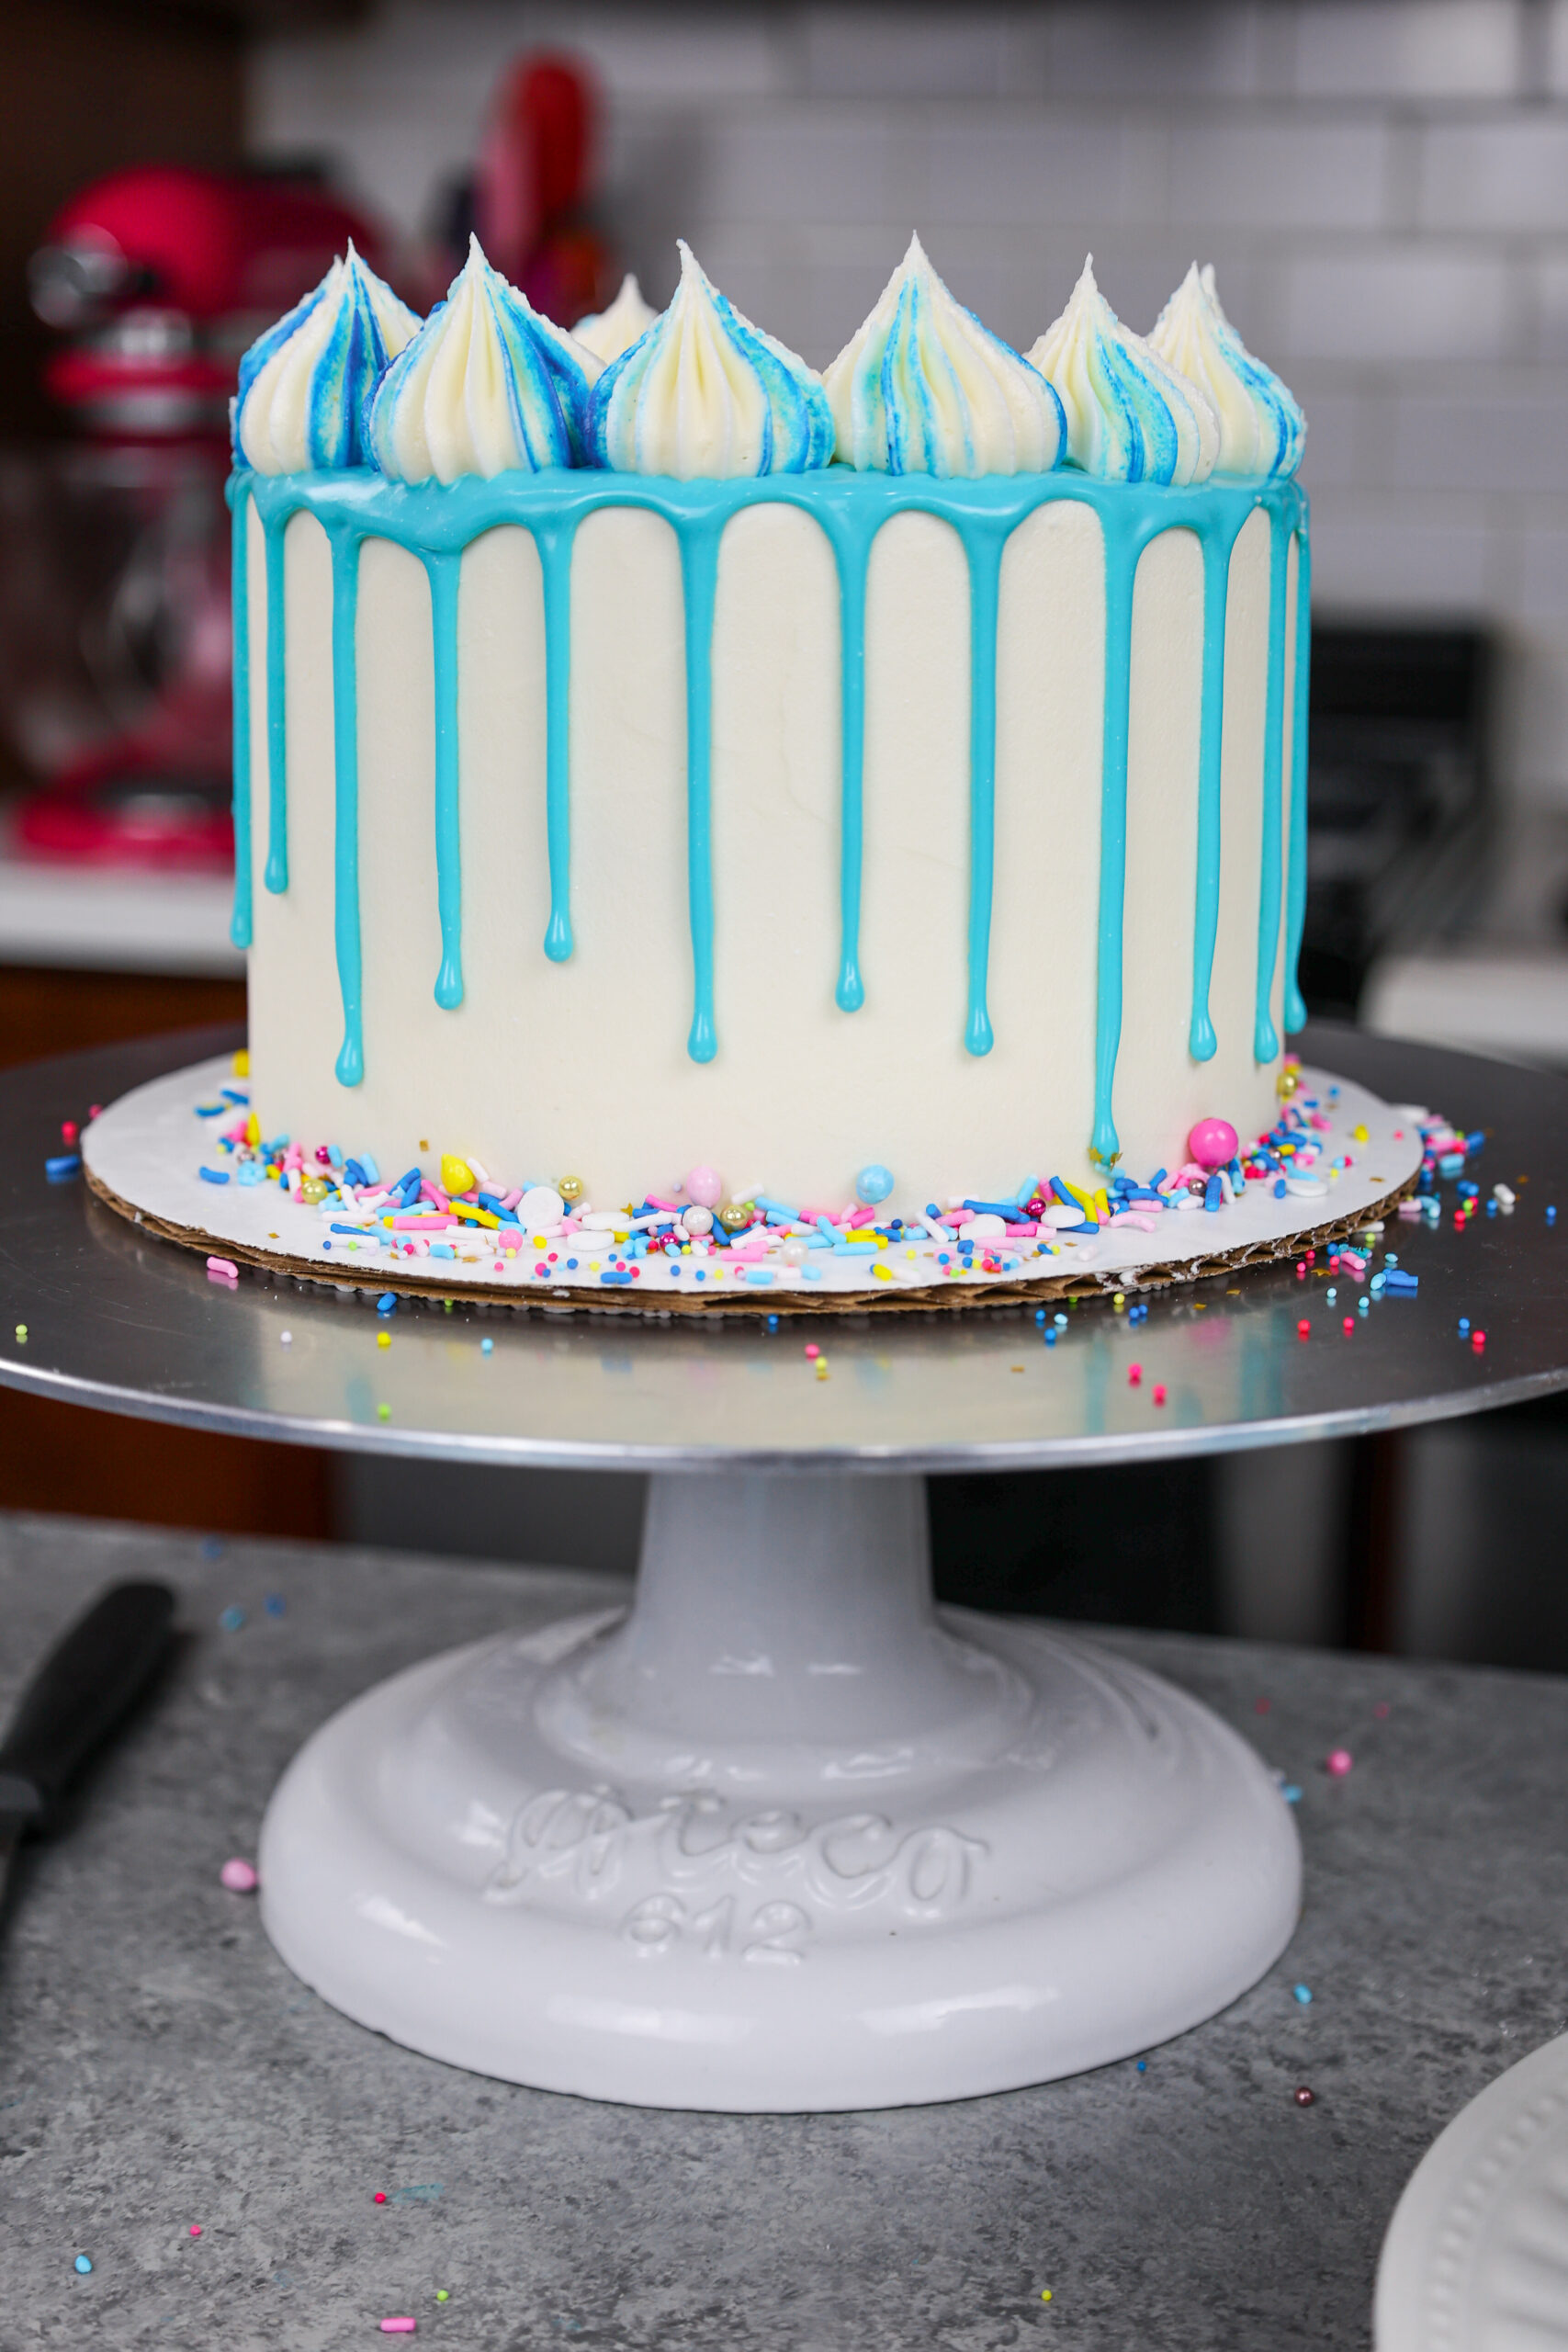 Butercream Drip Cake With Macaron Toppers - Little Buttercup Cakery